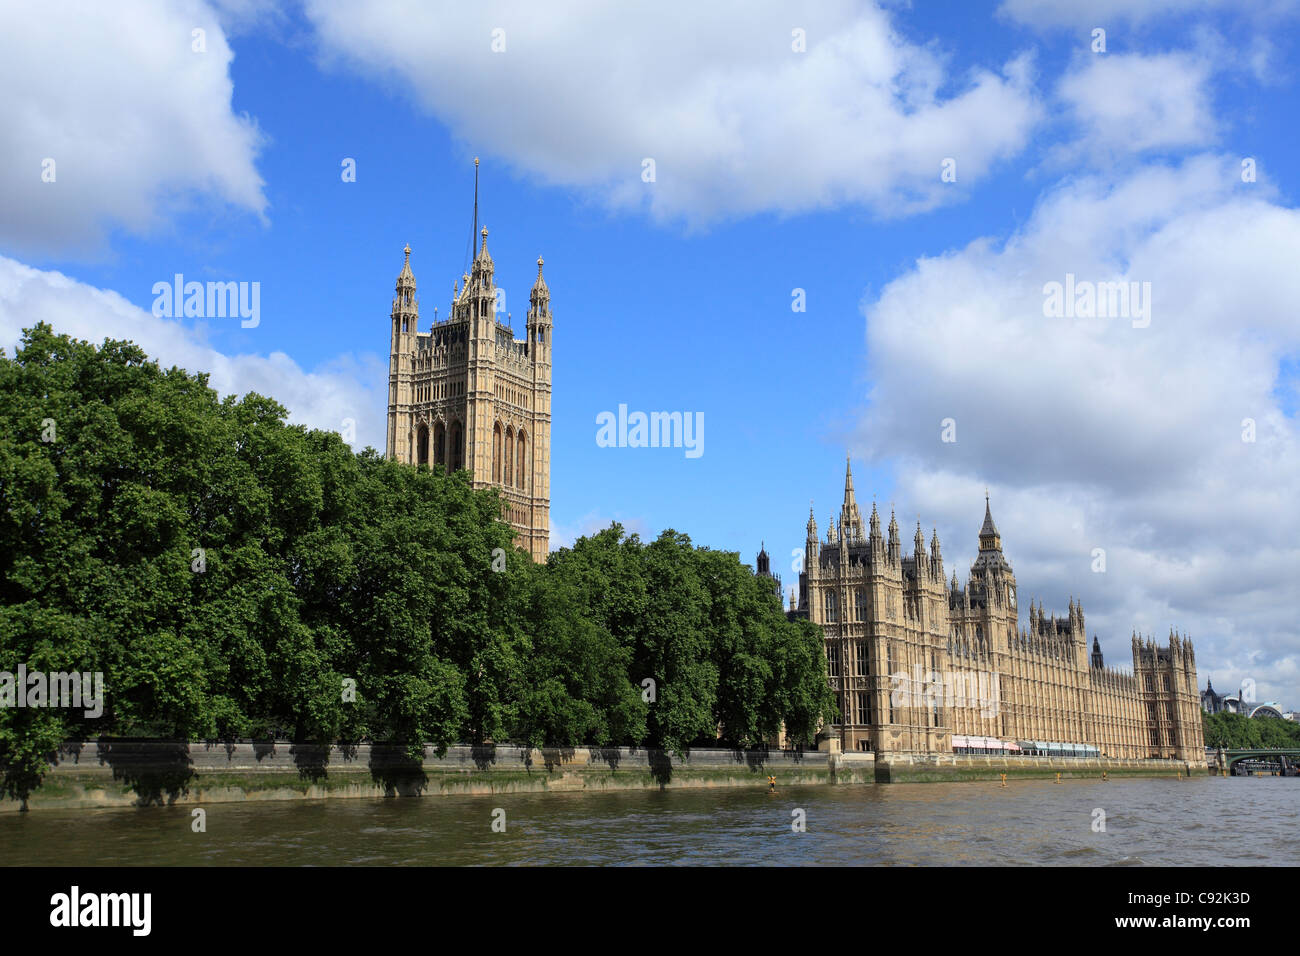 The Houses of Parliament is a historic centre of power and the seate of national government on the bank of the River Thames. Stock Photo